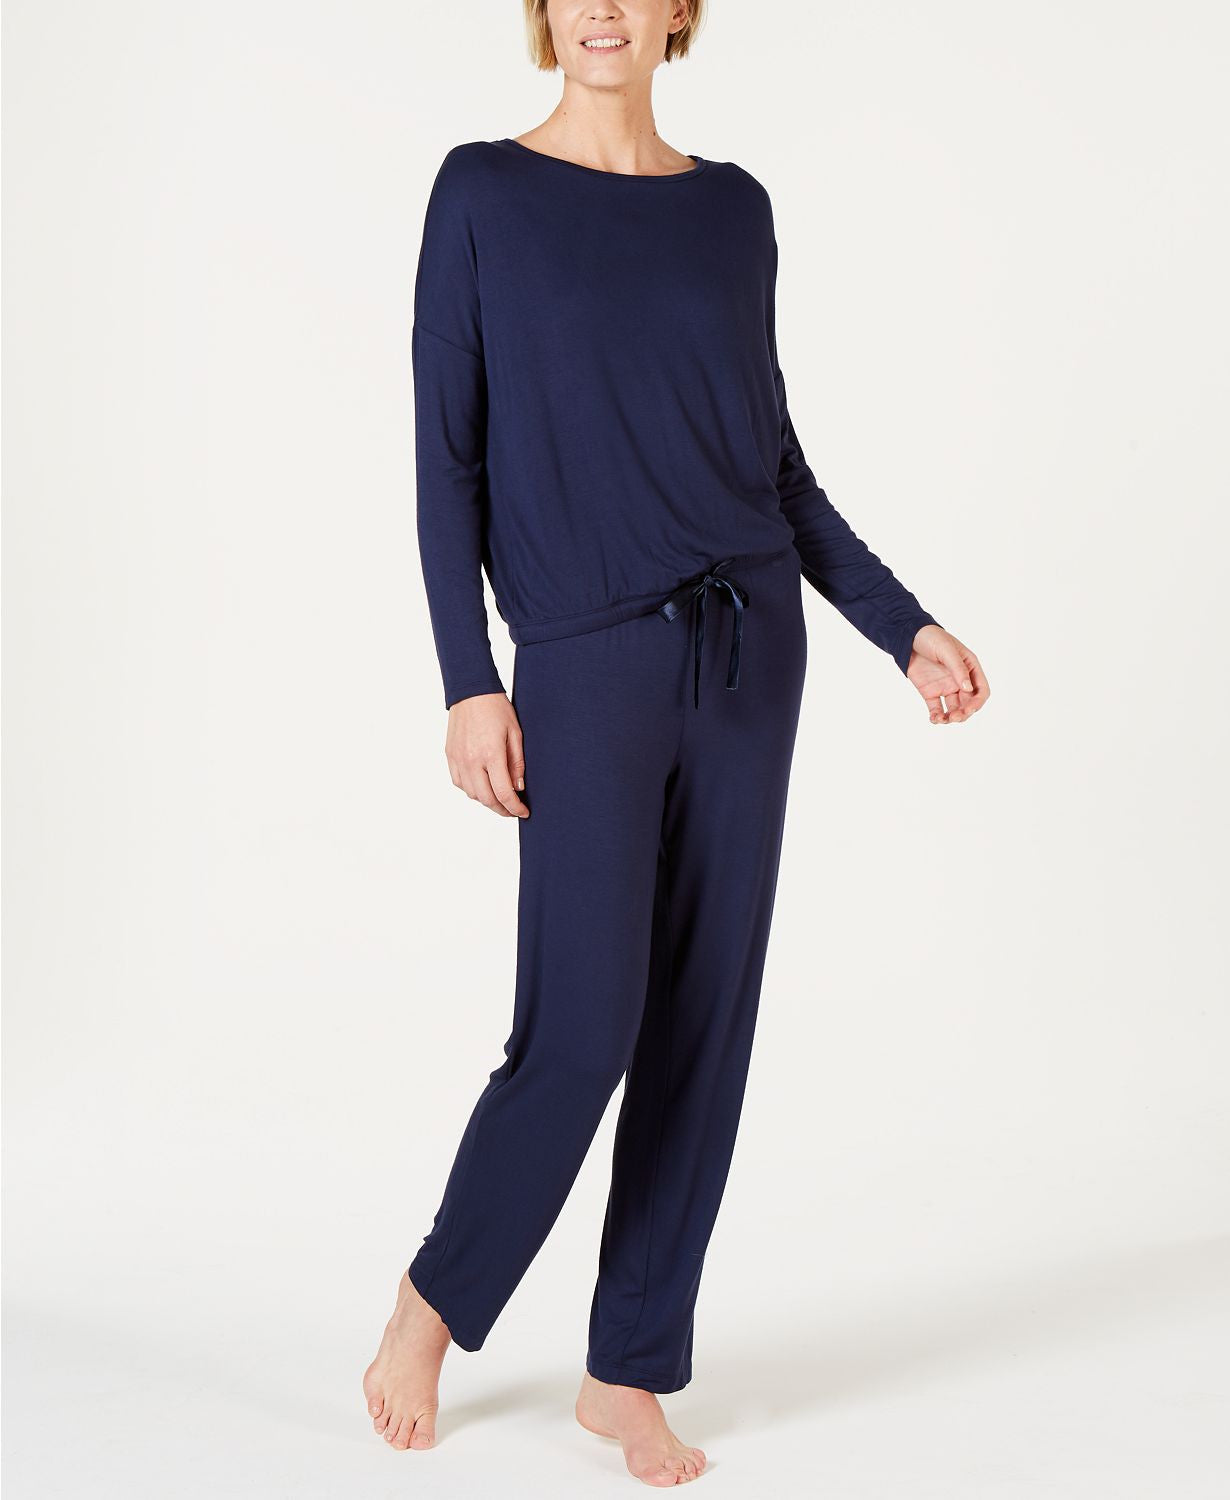 Alfani Ultra Soft Long Sleeve Top And Pant Set in Ink Blue